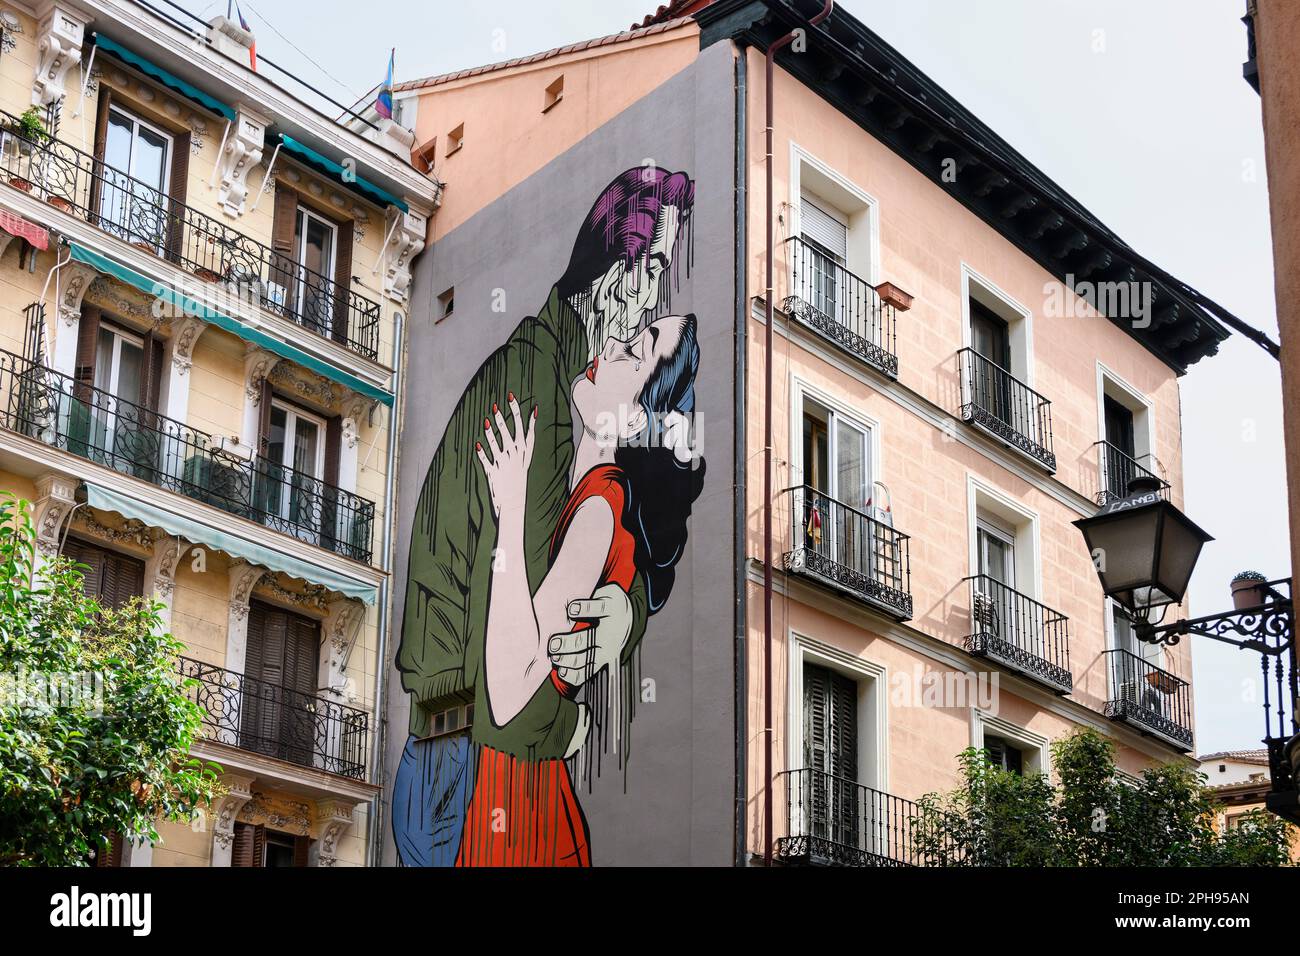 Mural called Run Away by artist D*Face on a building in the Calle de Embajadores, in the multi-cultural district of  Embajadores,Central Madrid, Spain Stock Photo